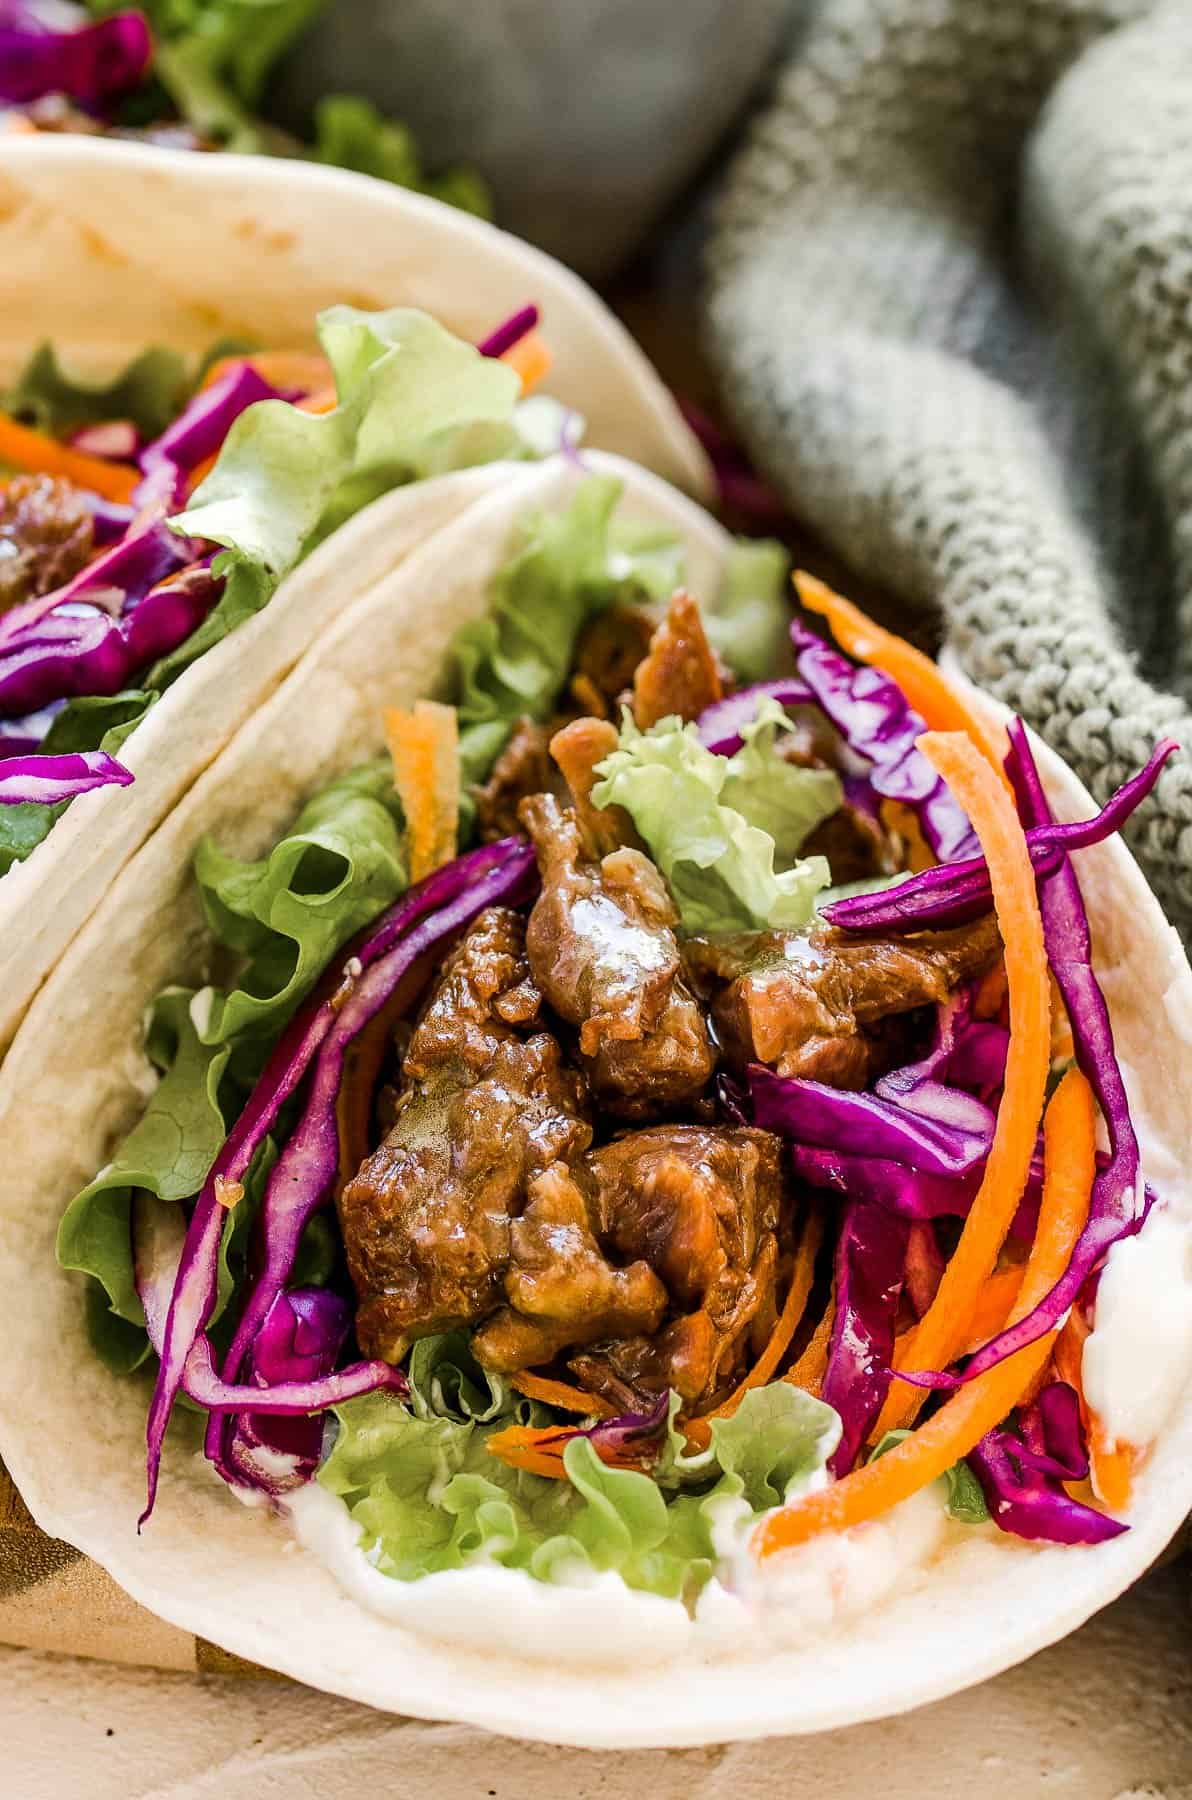 A flour tortilla filled with Korean beef and shredded veggies.